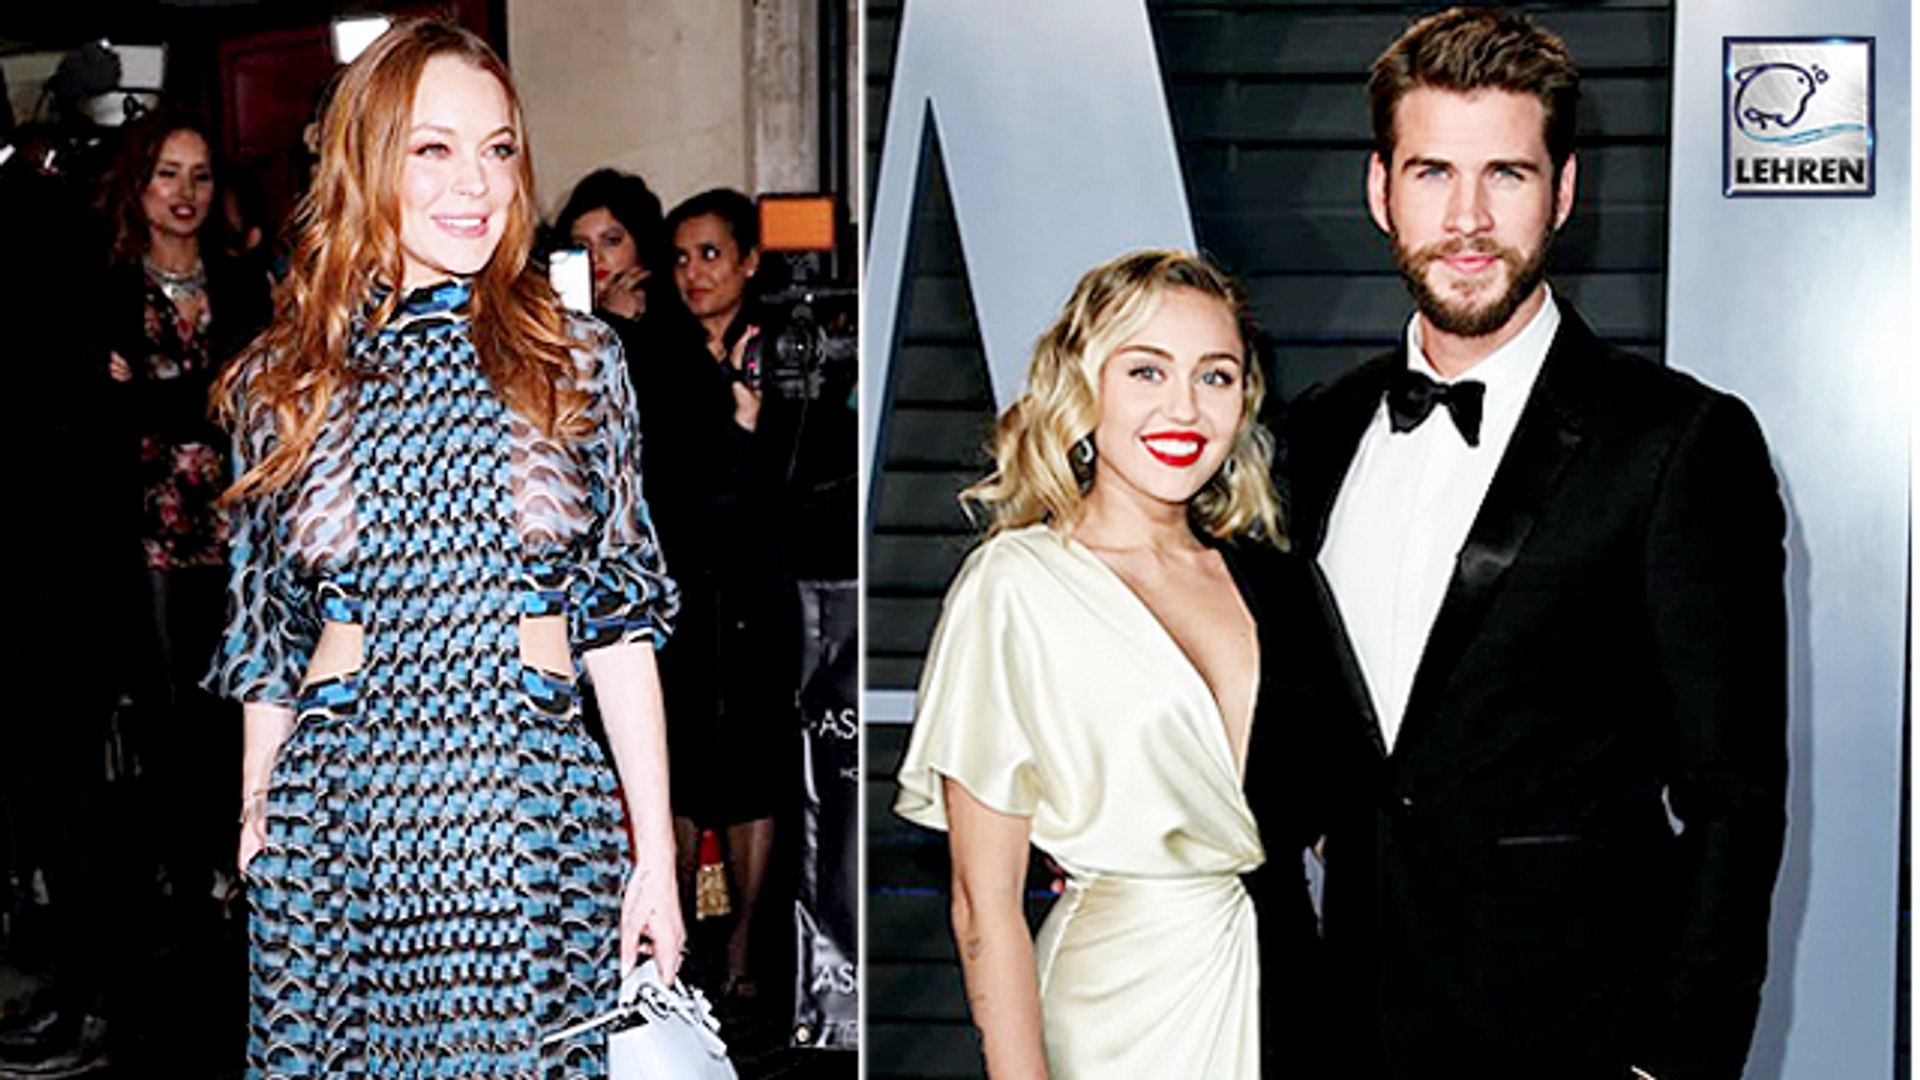 Lindsay Lohan Flirts With Liam Hemsworth But What Does Miley Think?